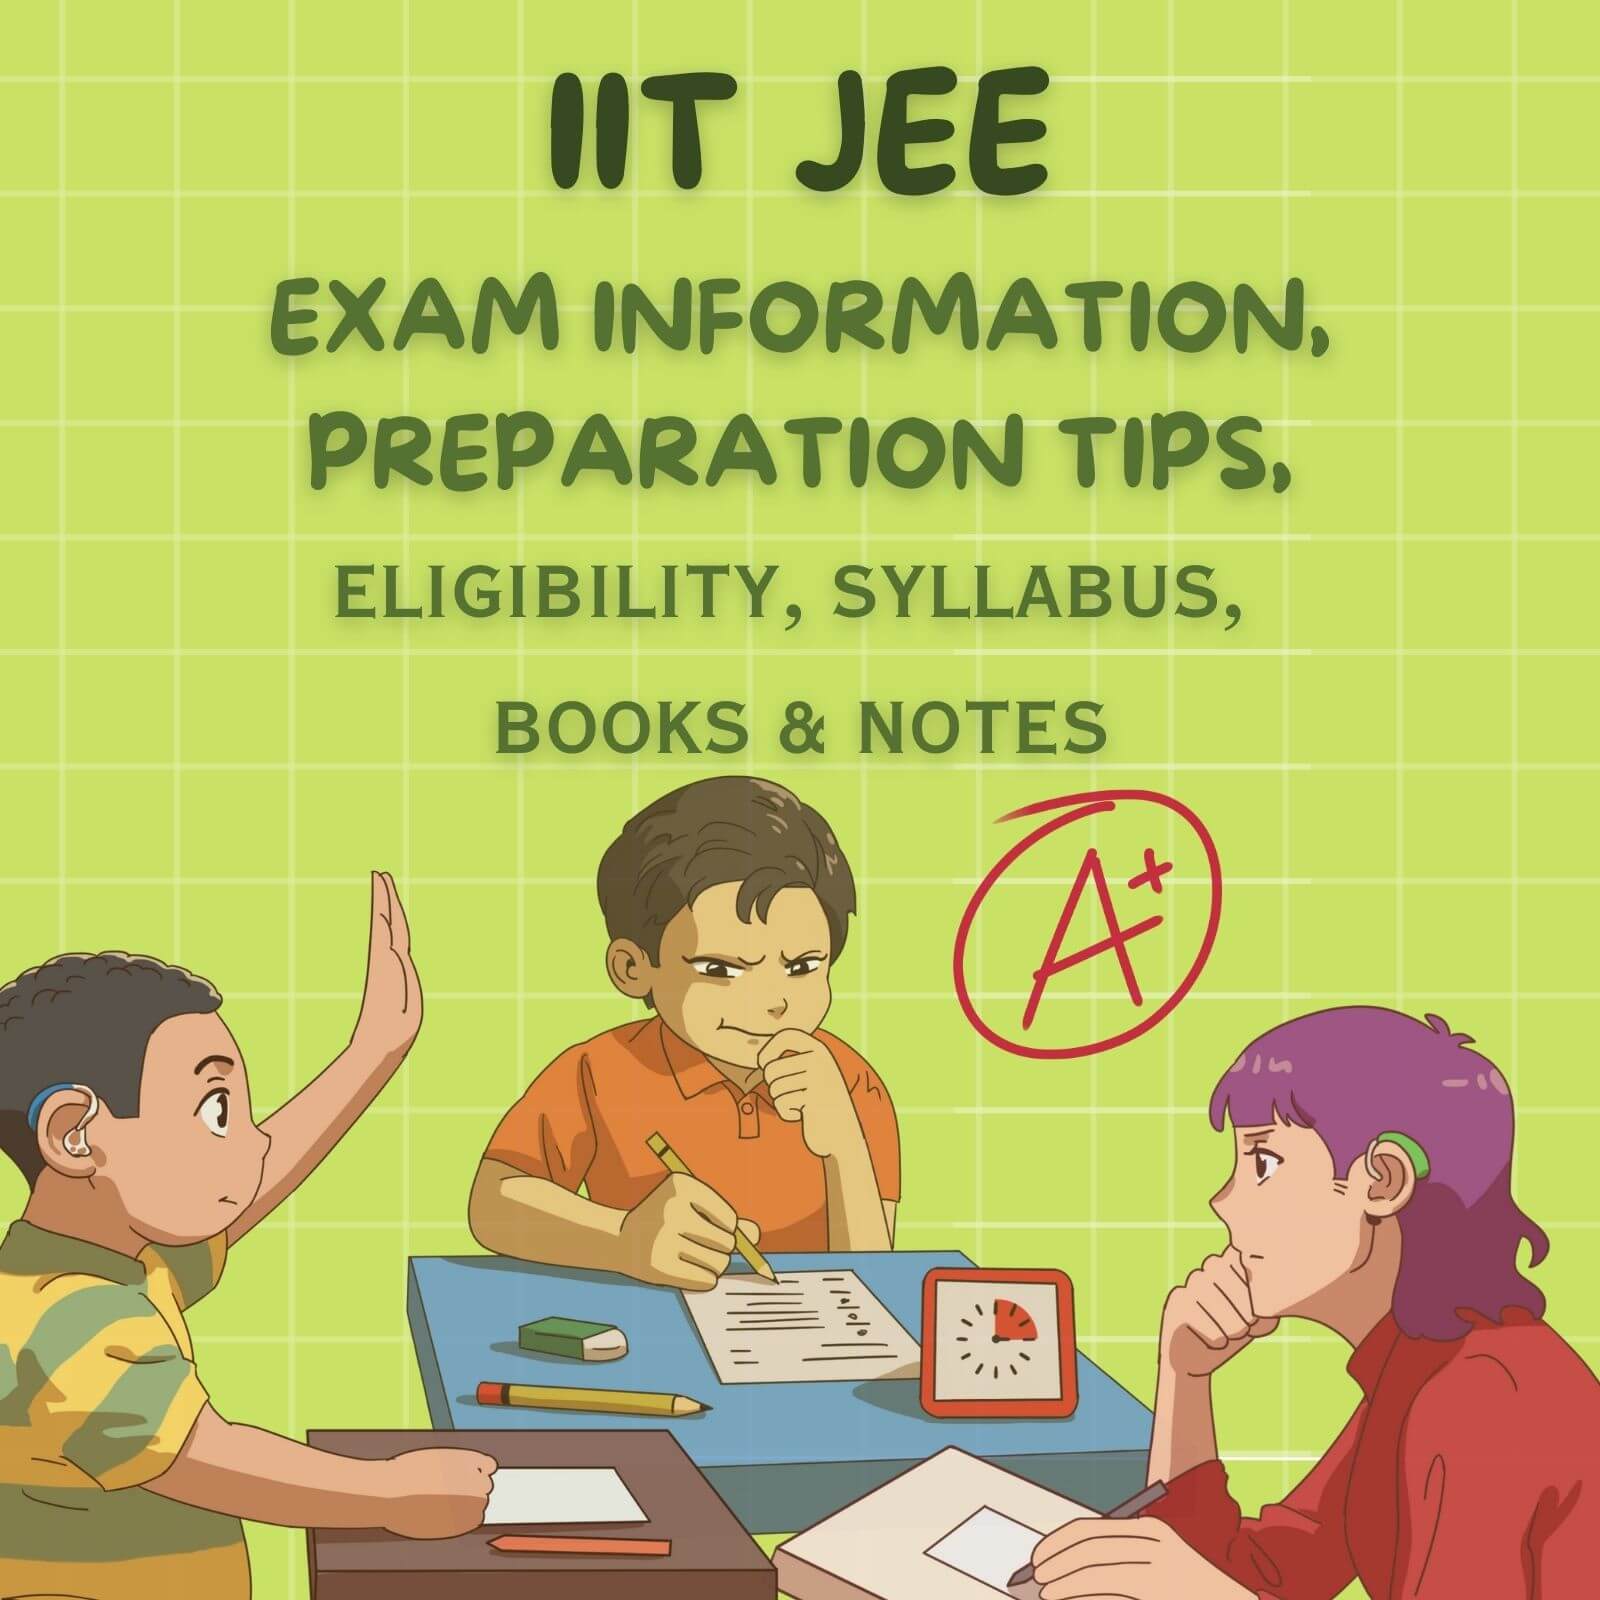 iit jee exam information tips syllabus pattern and notes